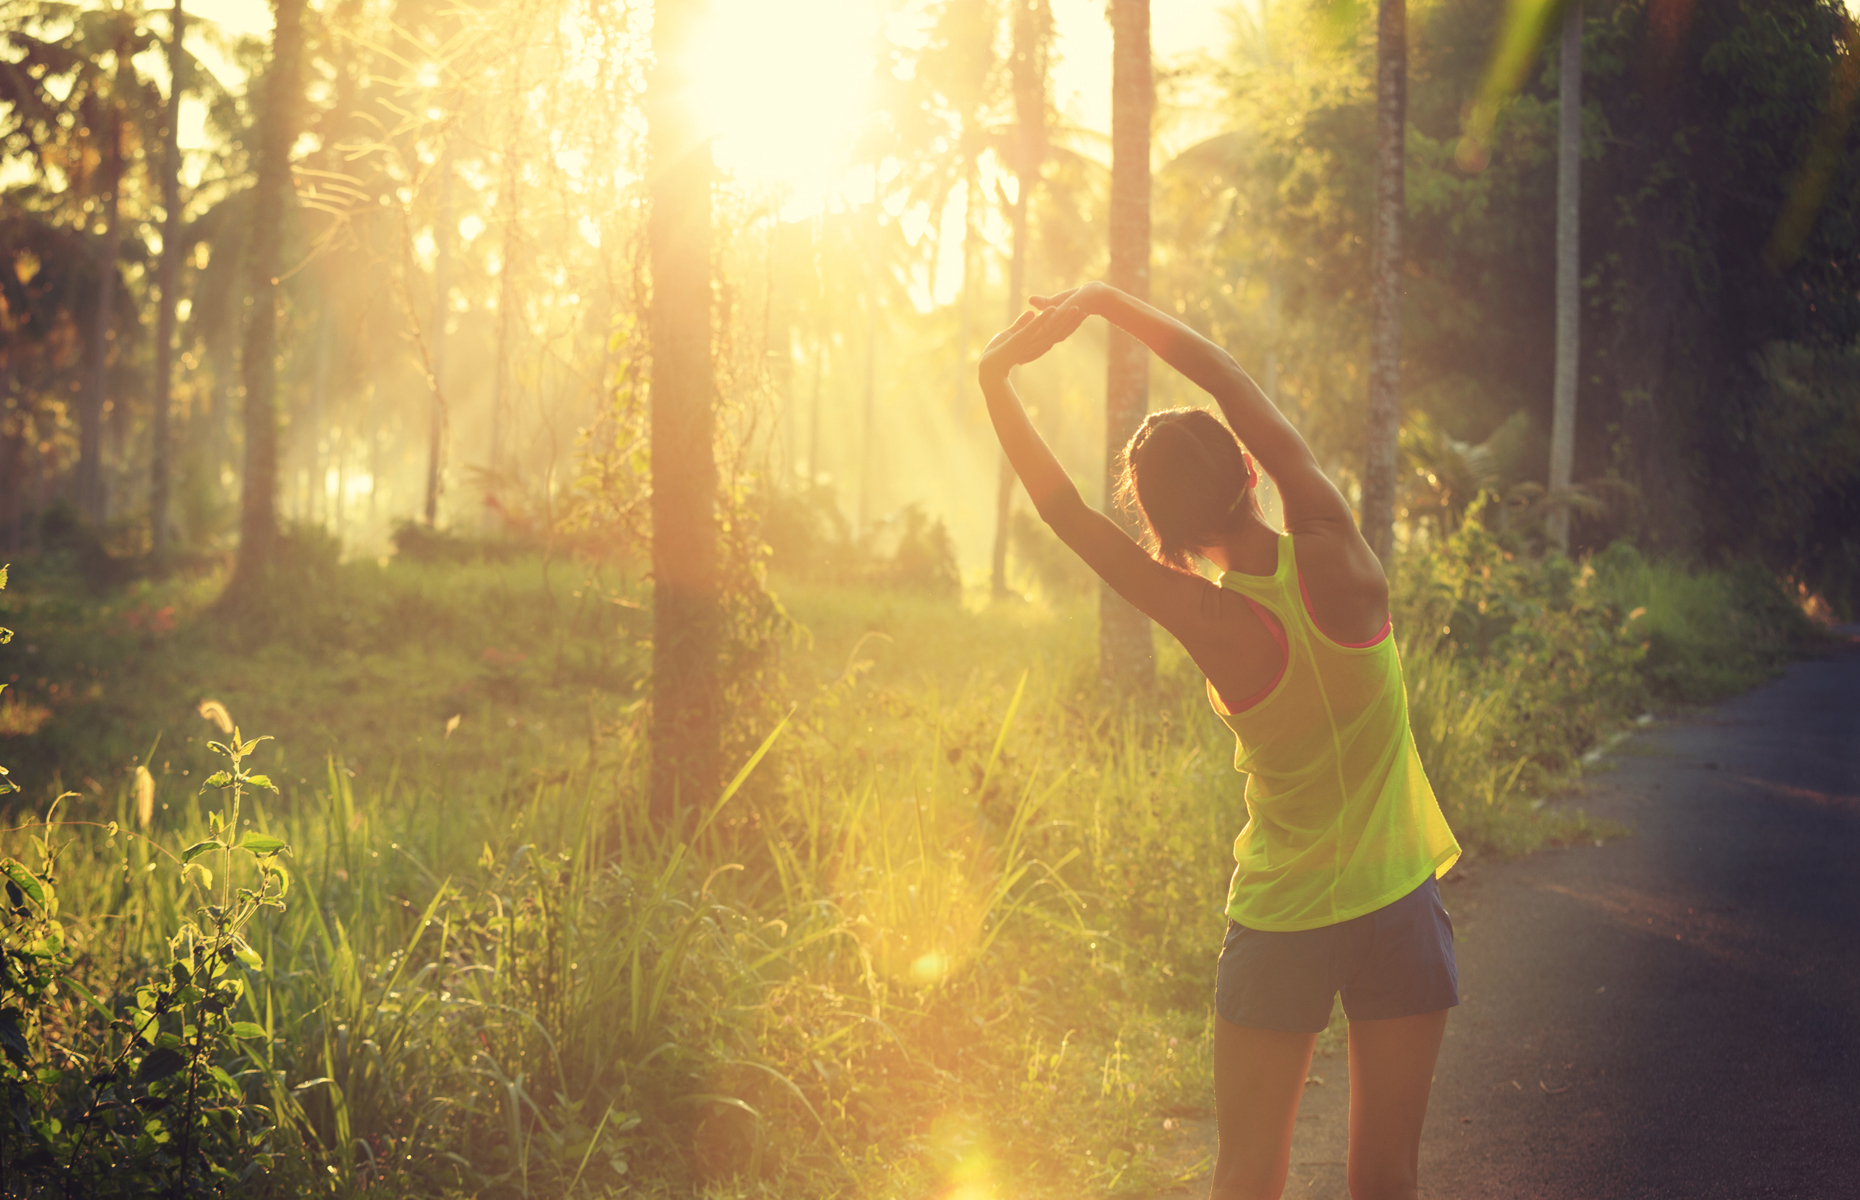 <p>Exercise can really help you start your day on the right foot. Exercise releases endorphins in your brain. These chemicals help <a href="https://www.nbcnews.com/better/pop-culture/9-things-do-morning-make-your-whole-day-more-productive-ncna772446" rel="noreferrer noopener">reduce pain, discomfort, and stress hormones</a>. And they boost energy, mental sharpness, and well-being. This natural high helps you feel good, in control, and motivated to achieve your goals</p>